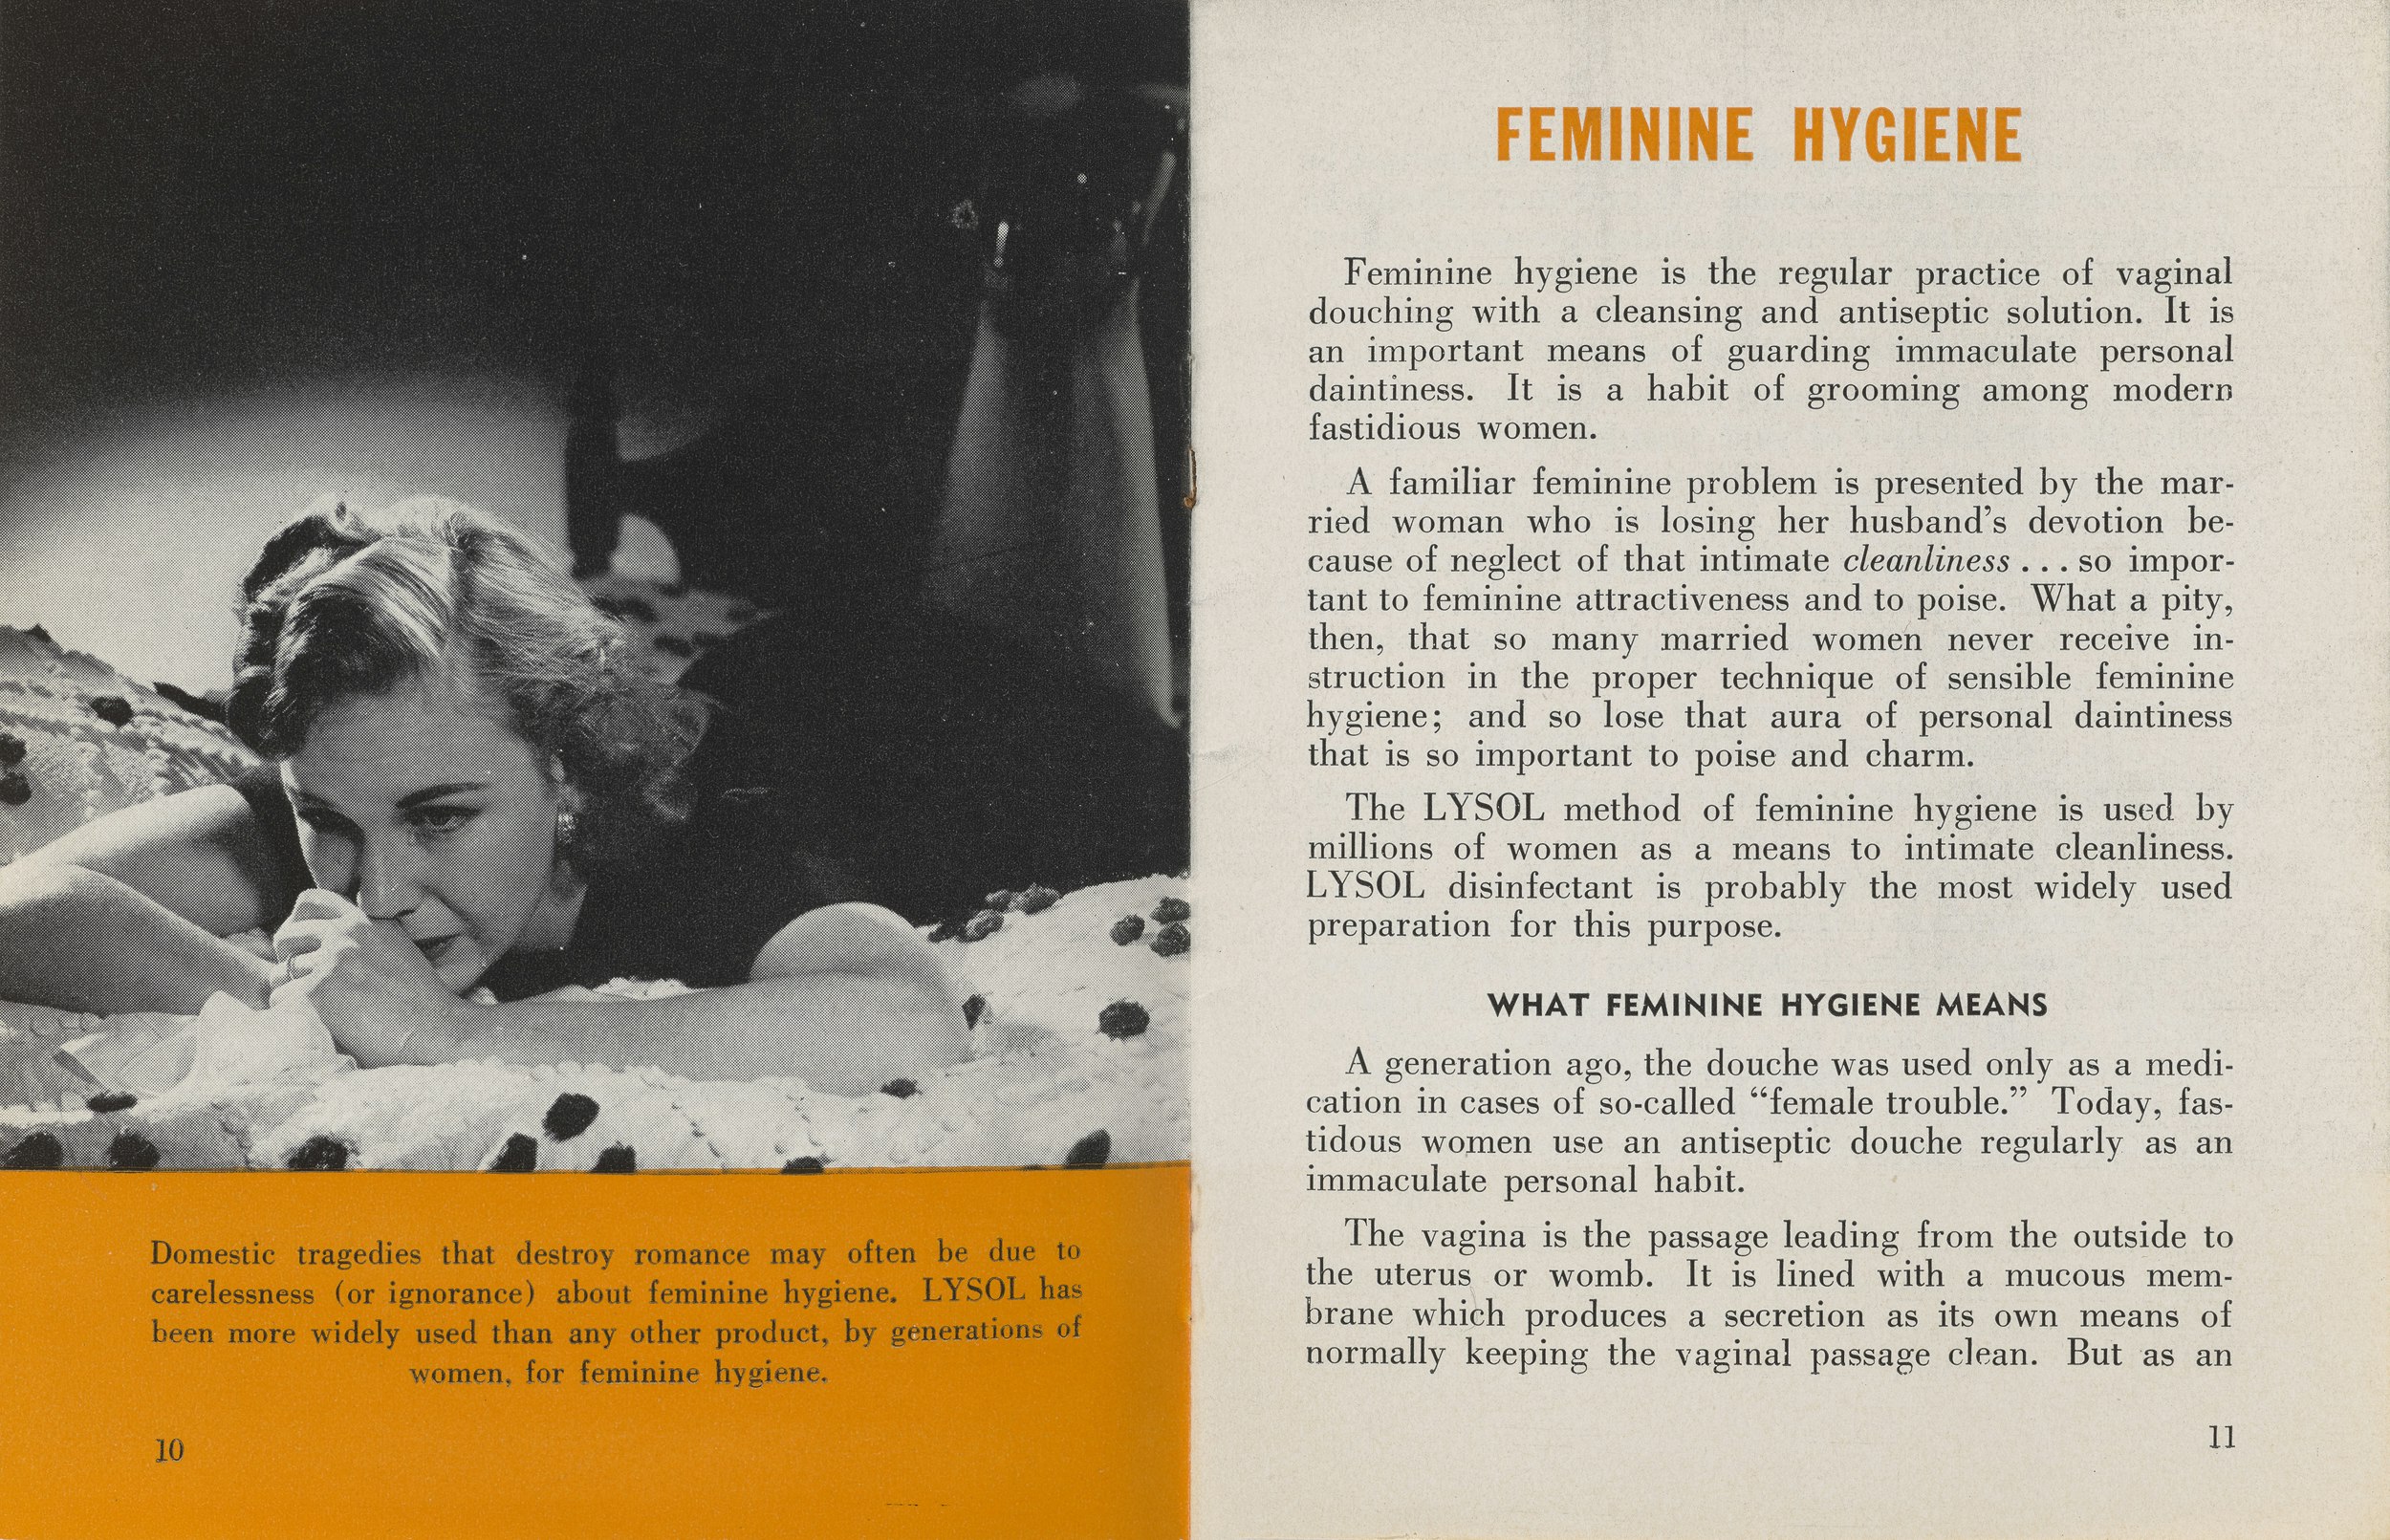 A brochure spread about feminine hygiene that talks about vaginal douching. A black-and-white photo shows a woman crying on a bed.